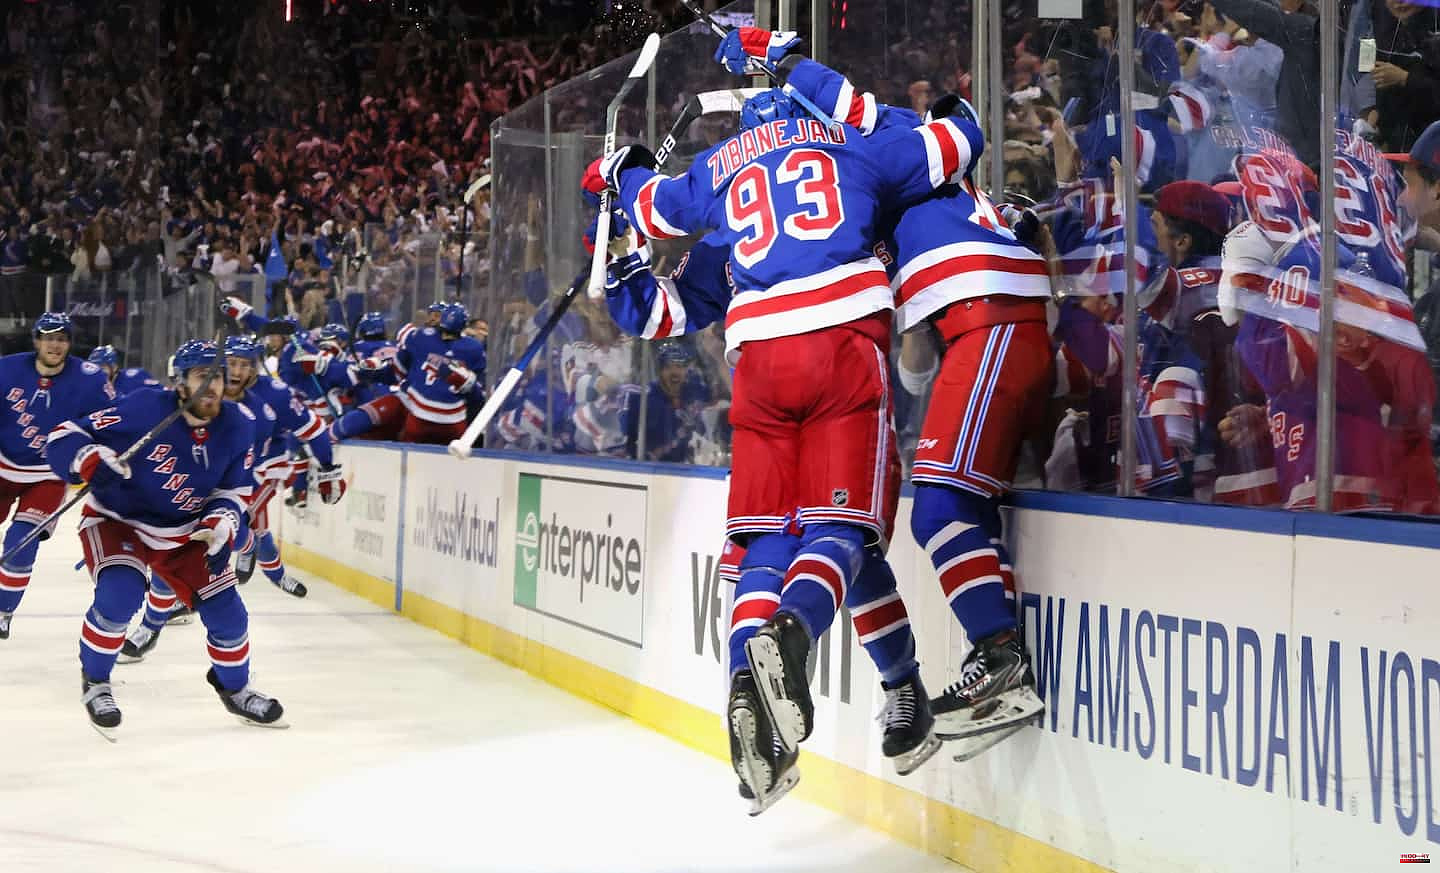 Rangers win final game in overtime